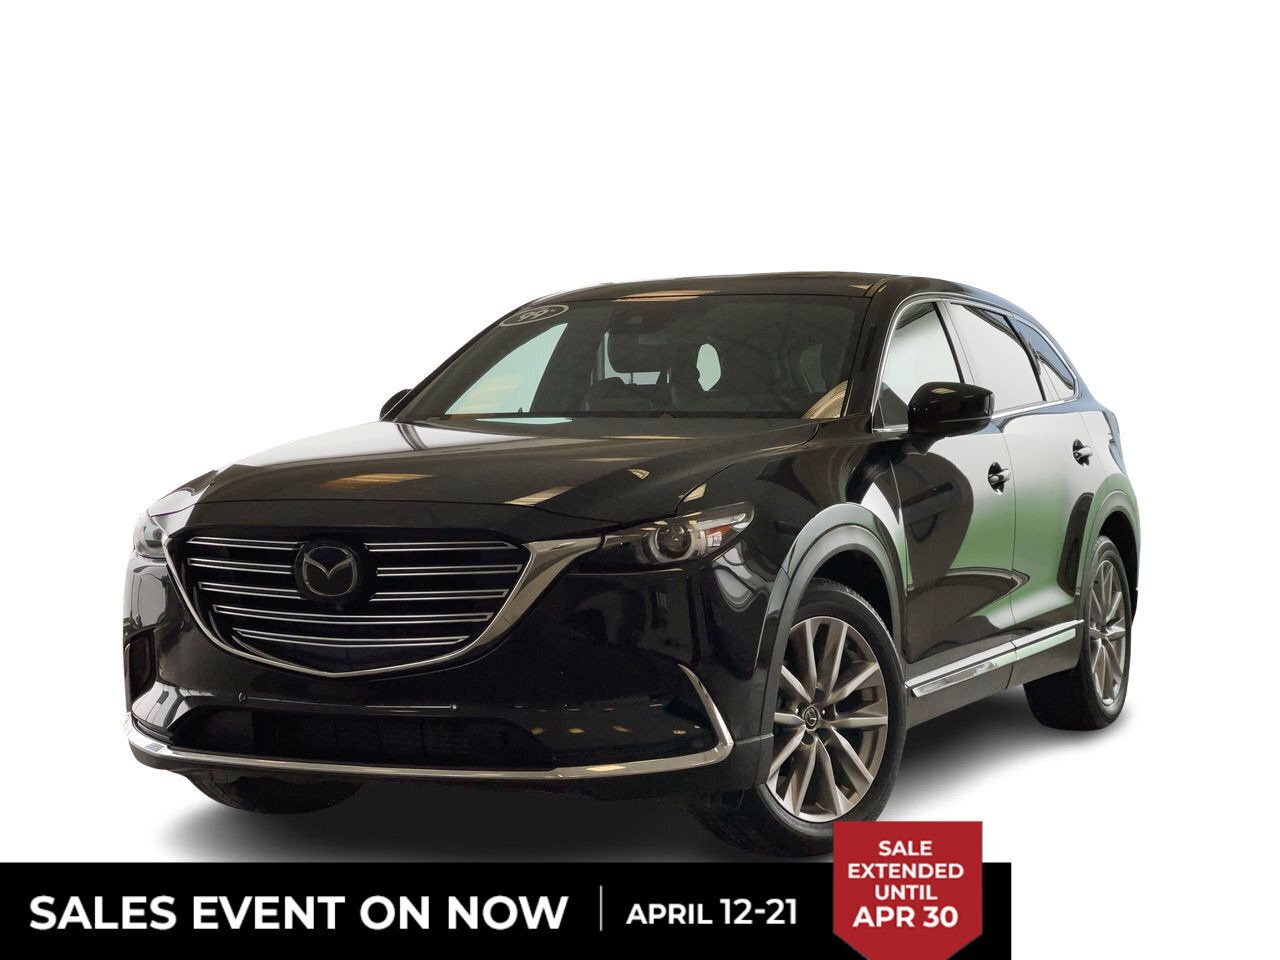 2021 Mazda CX-9 GT AWD Leather, Navigation, Moonroof, Local Trade 